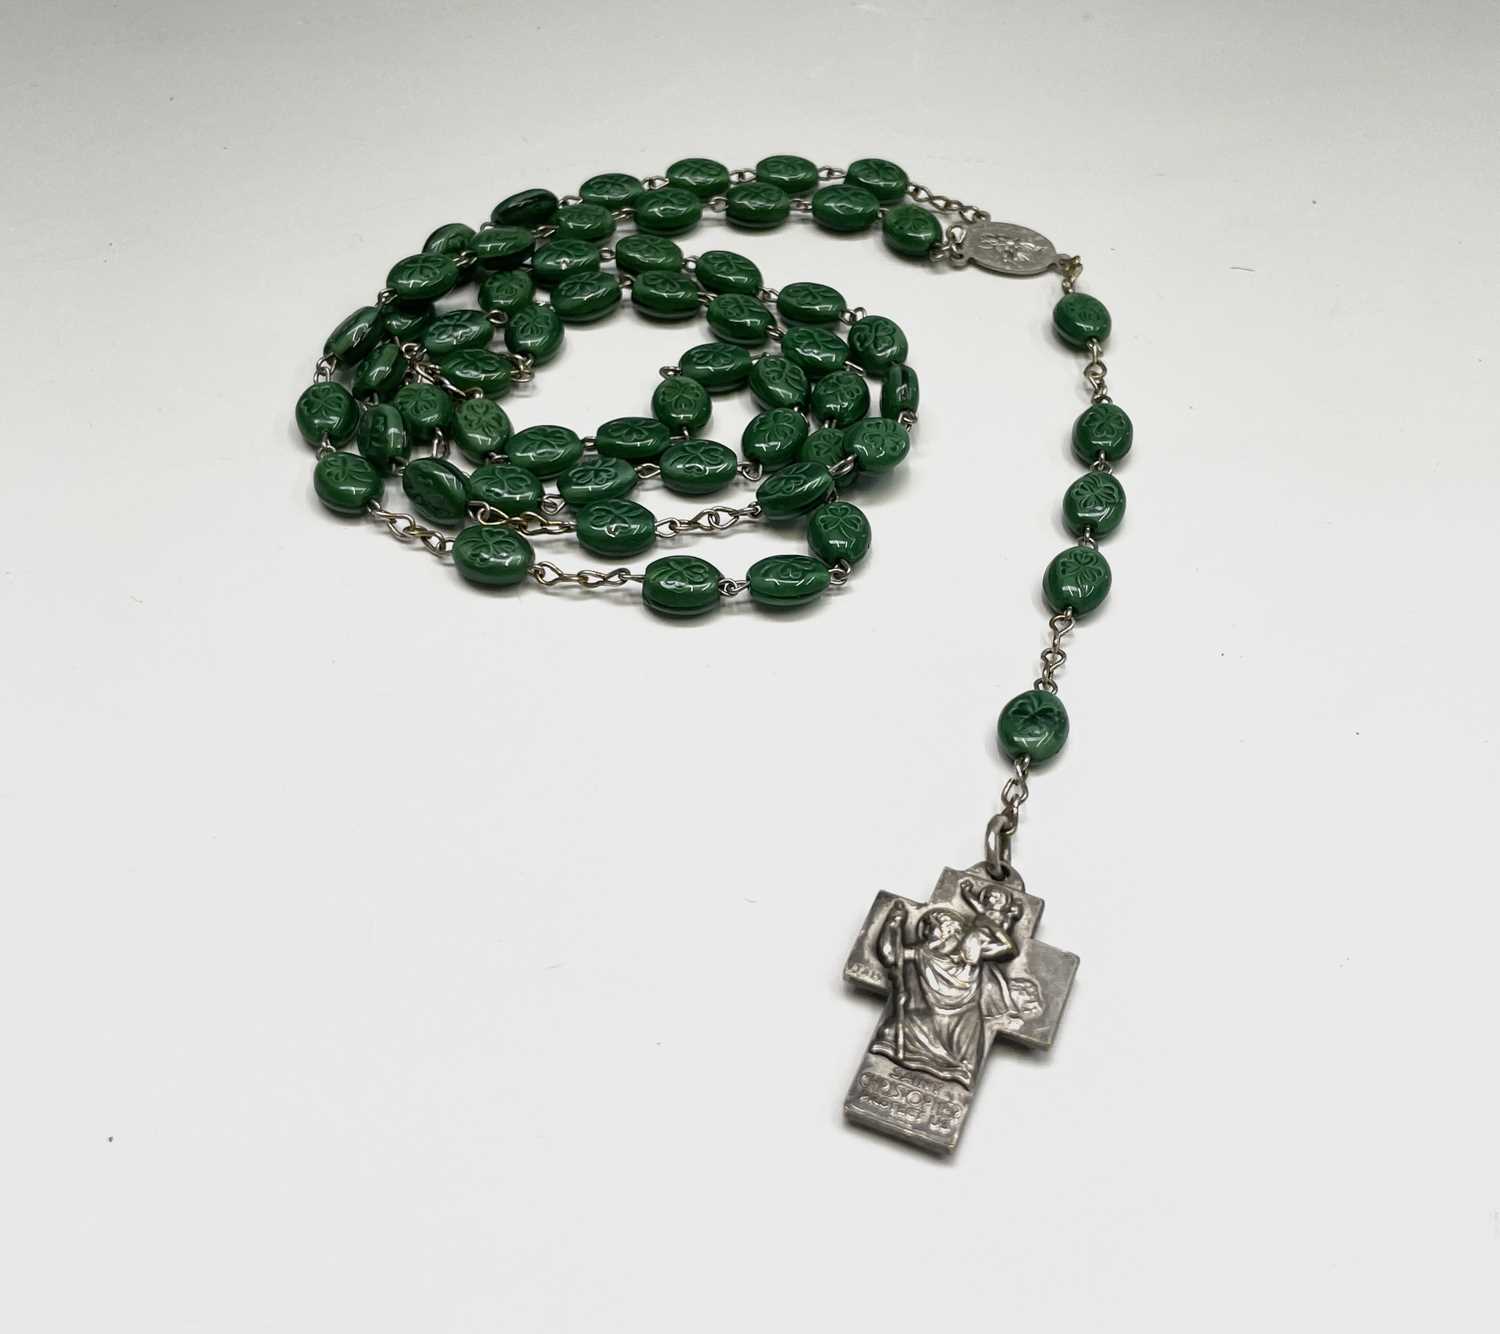 Fifteen rosary bead necklaces, all with unique decorative crosses. - Image 5 of 20